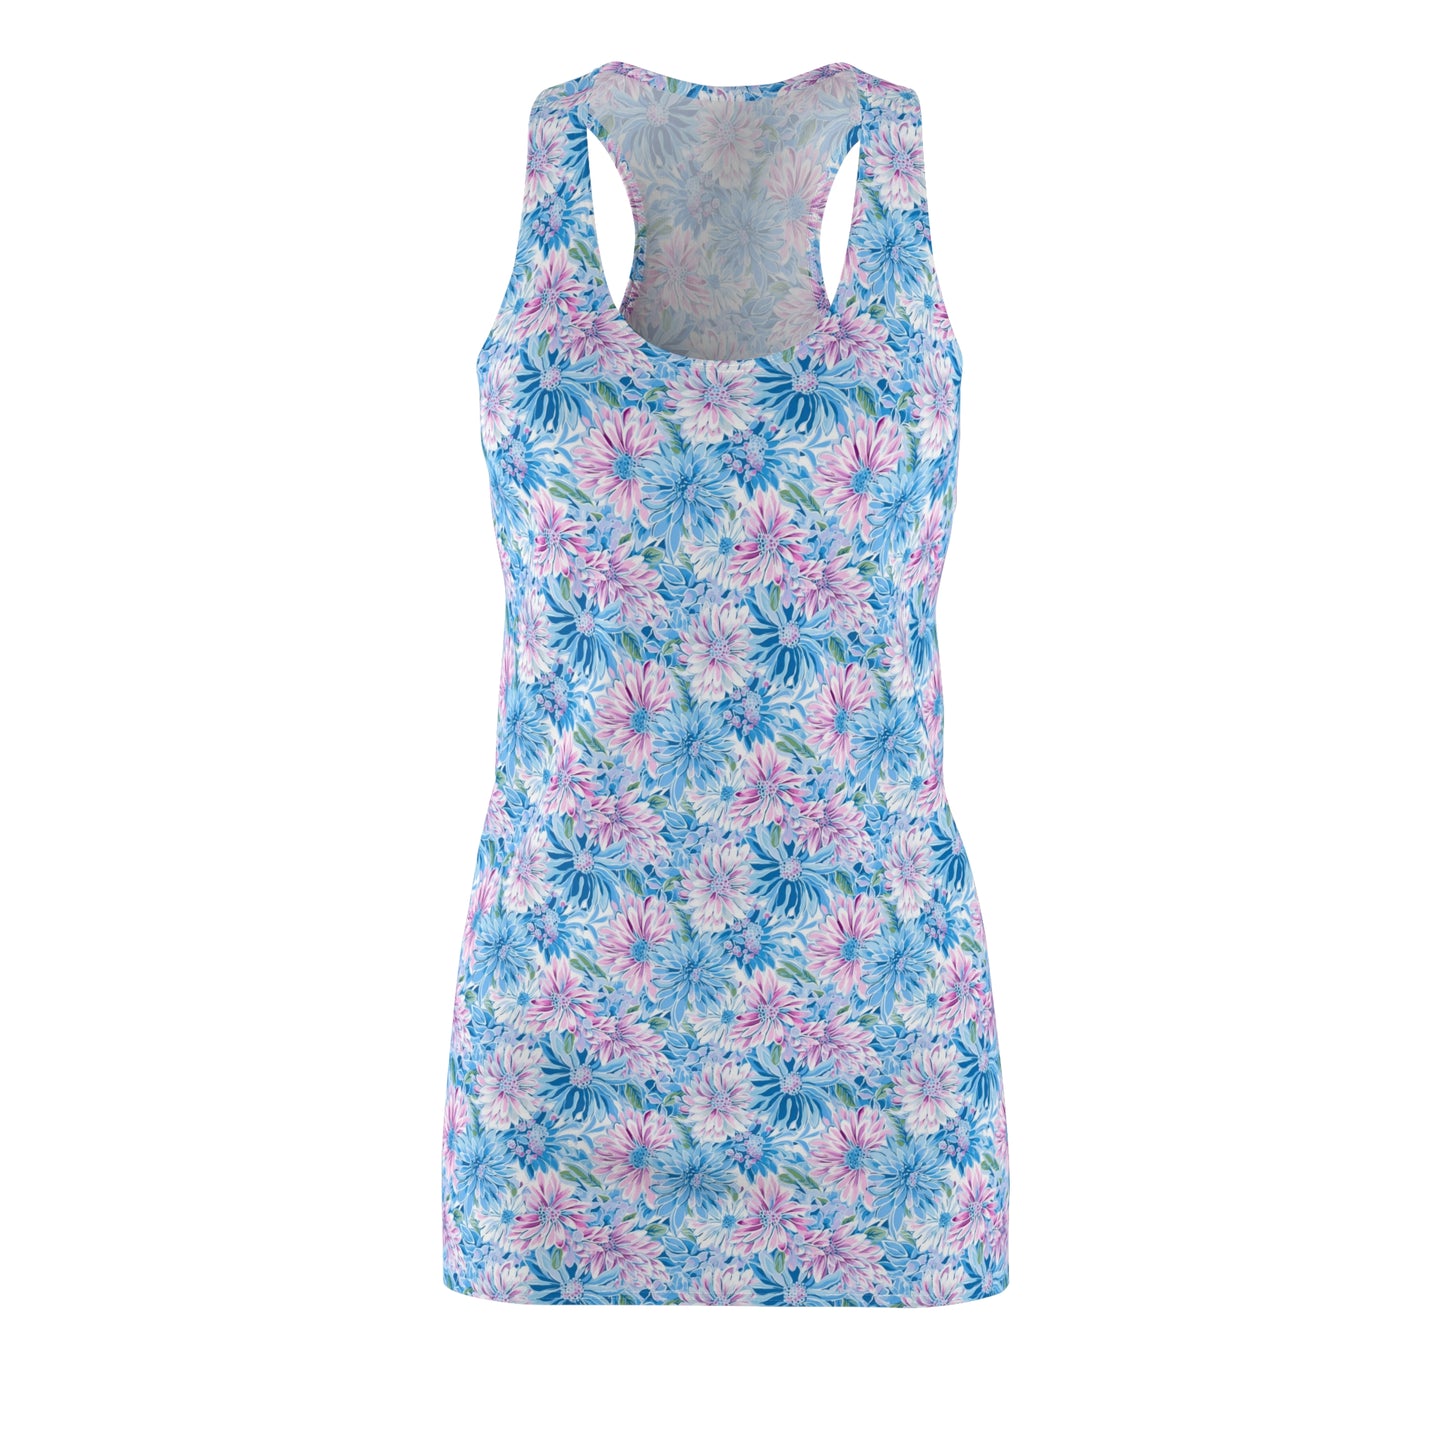 Pastel Blossom Symphony: Spring Flowers in Soft Pink and Blue Hues Women's Racerback Dress XS - 2XL